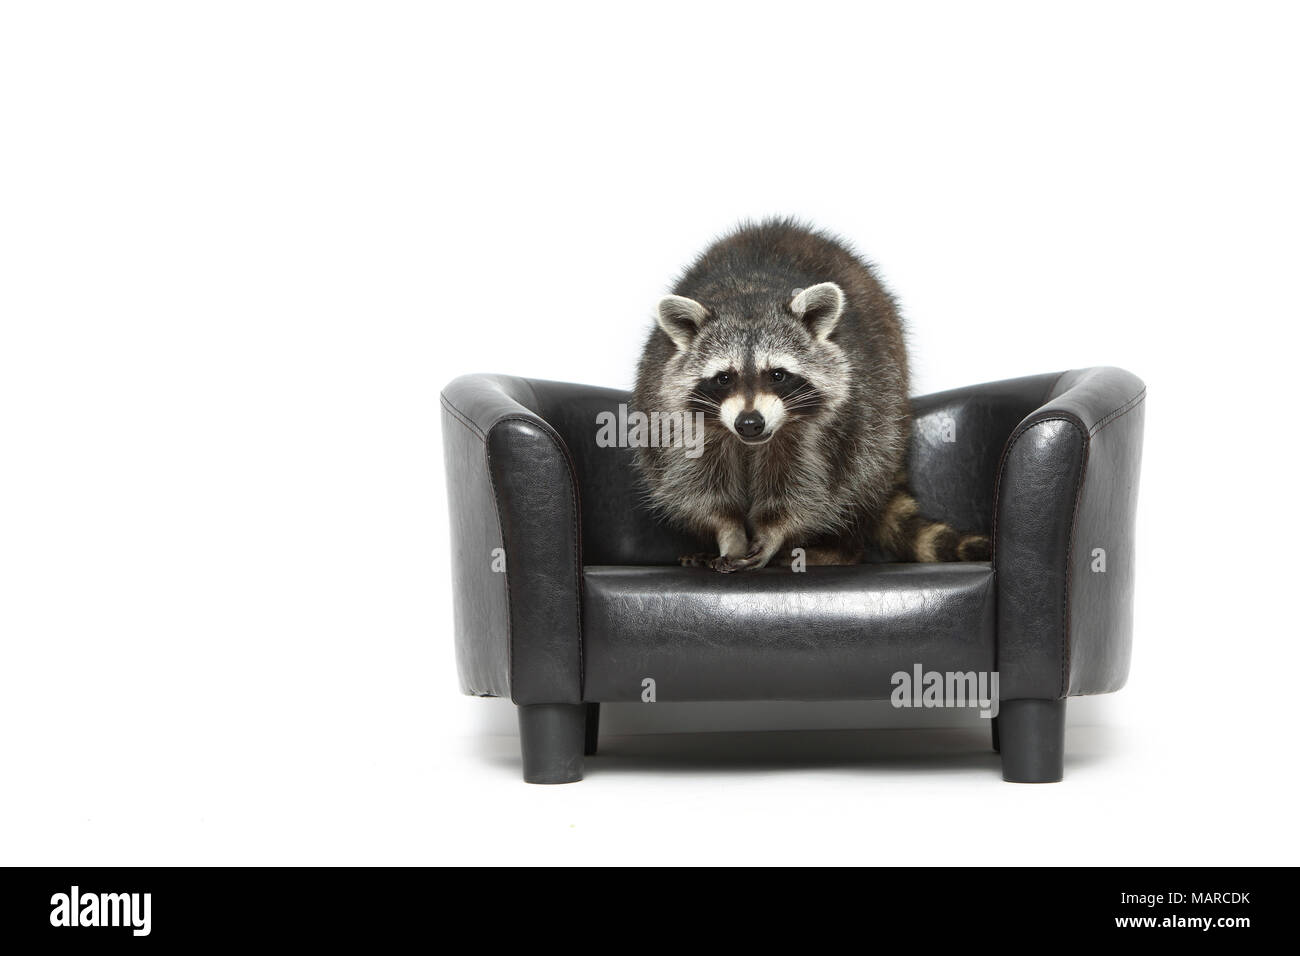 Raccoon (Procyon lotor). Adult standing on a black armchair. Studio picture against a white background. Germany Stock Photo